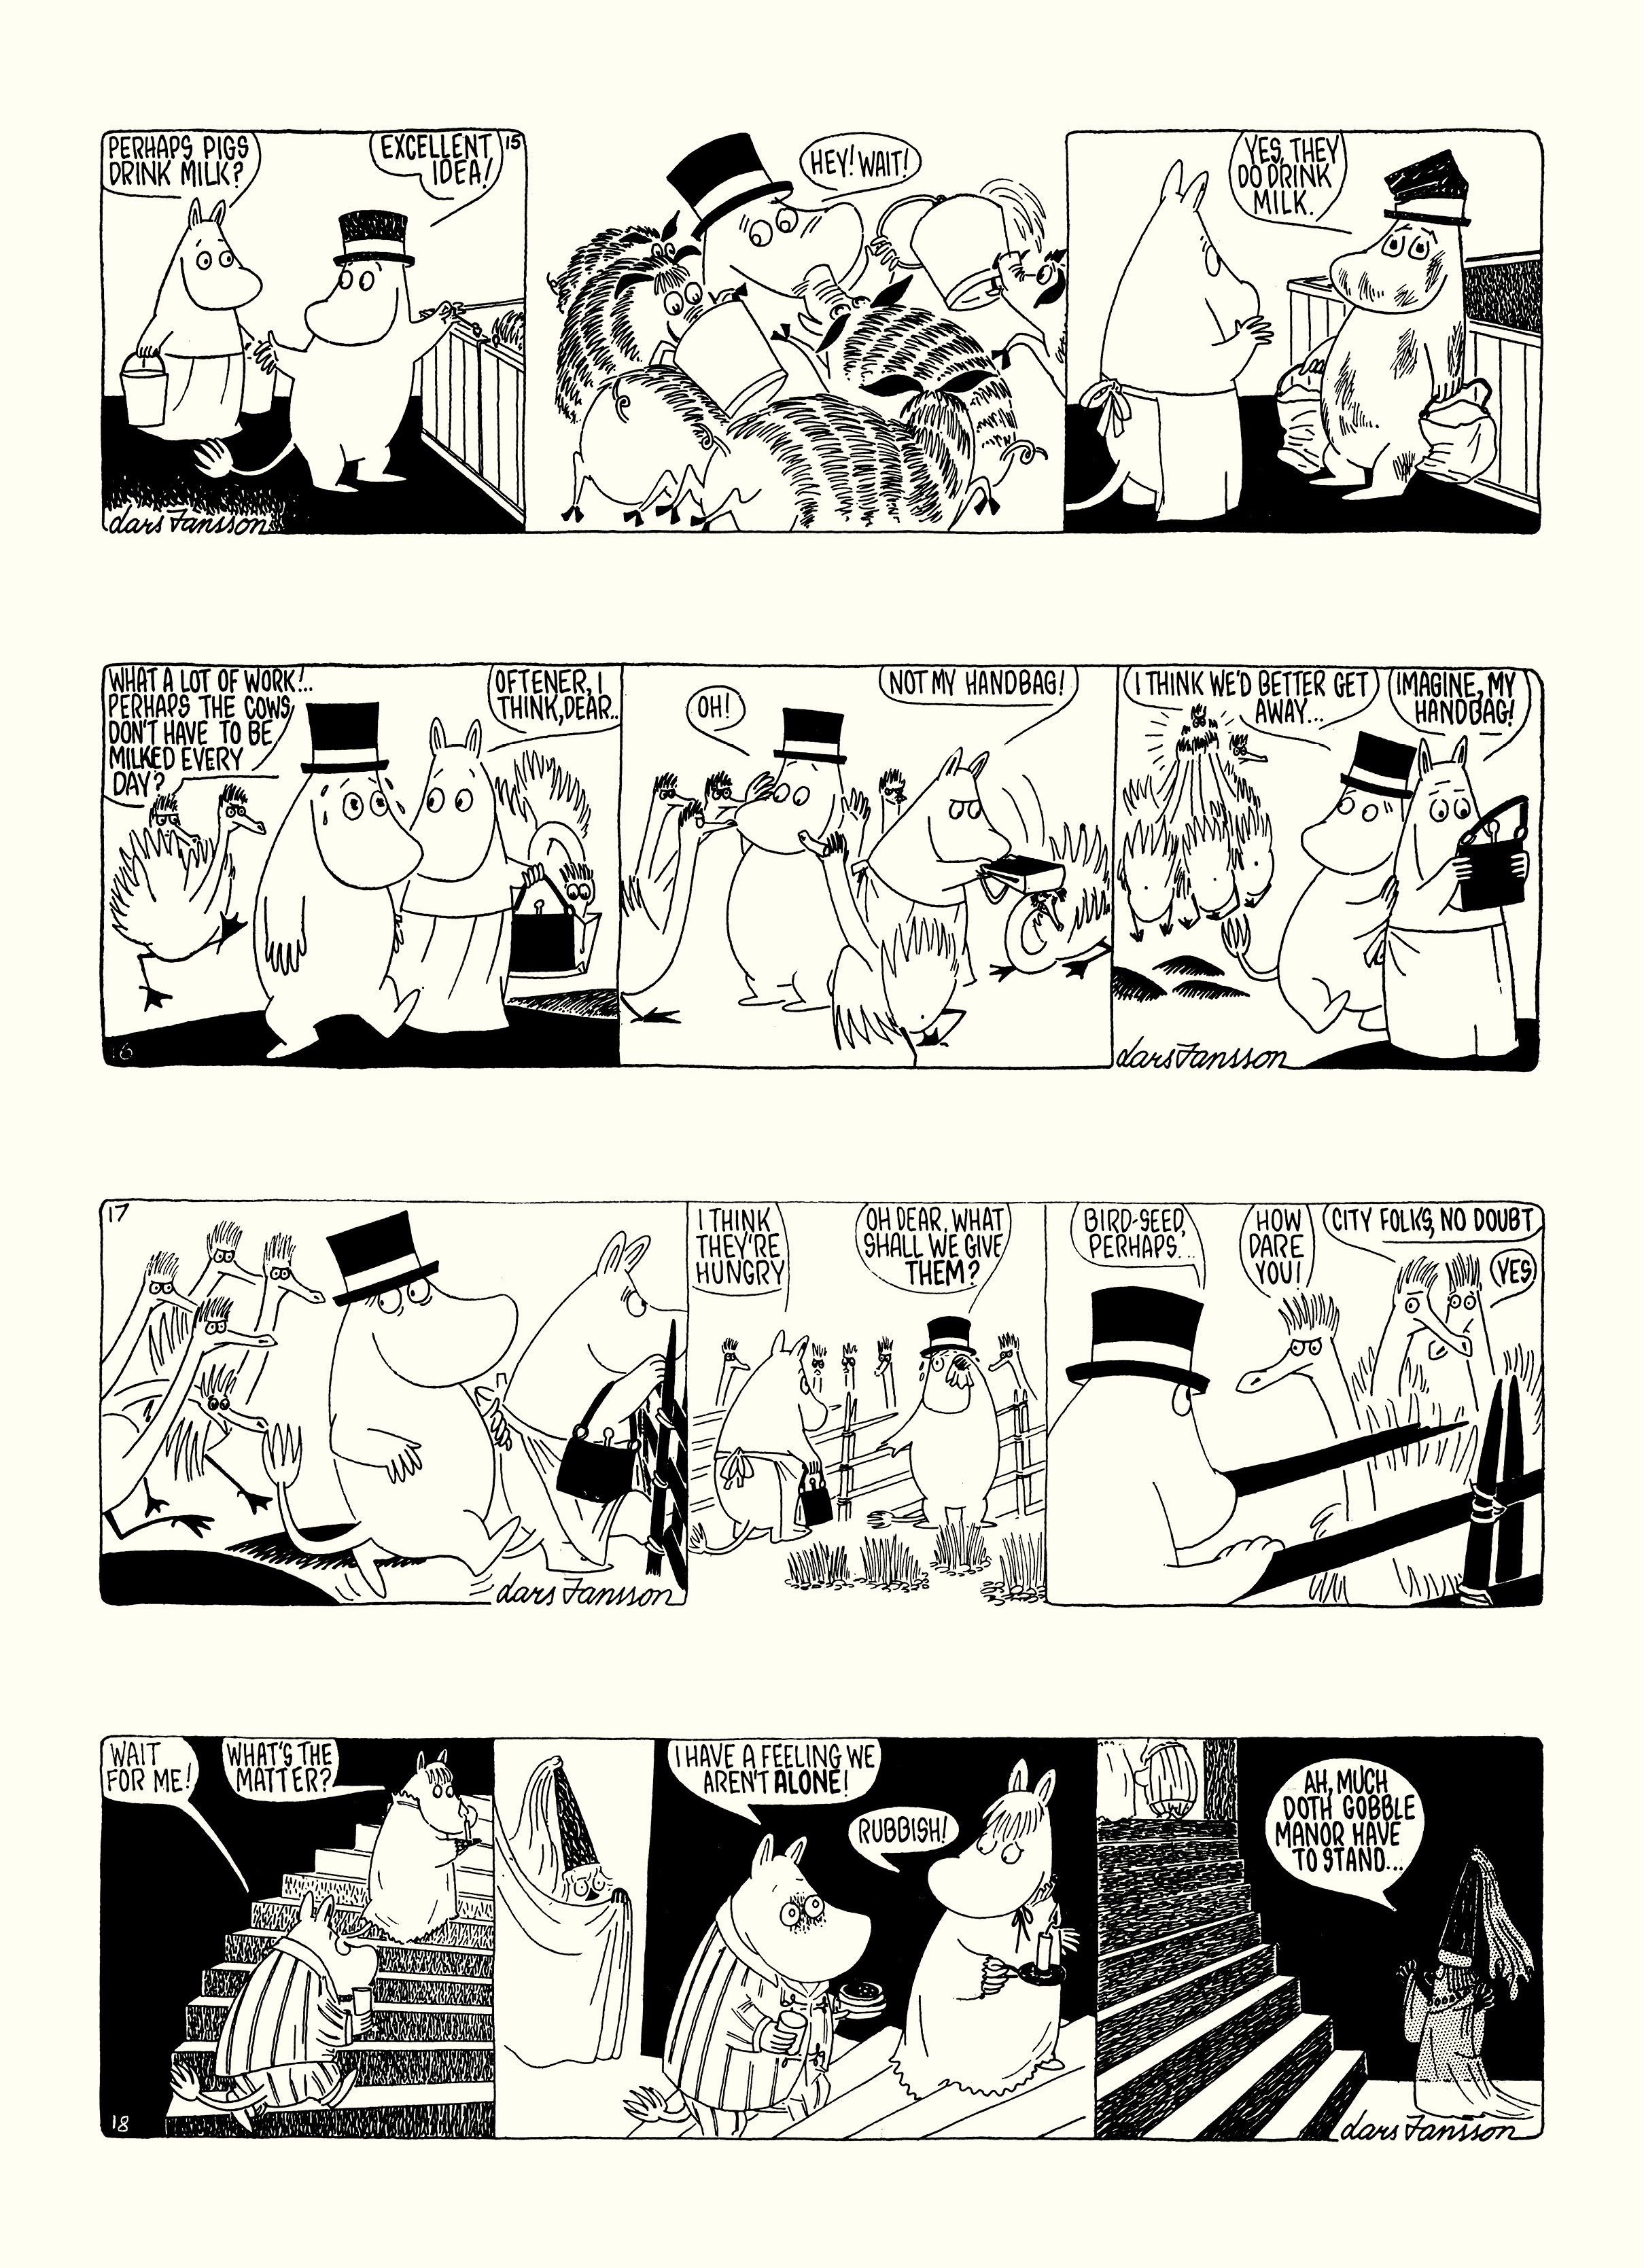 Read online Moomin: The Complete Lars Jansson Comic Strip comic -  Issue # TPB 7 - 52